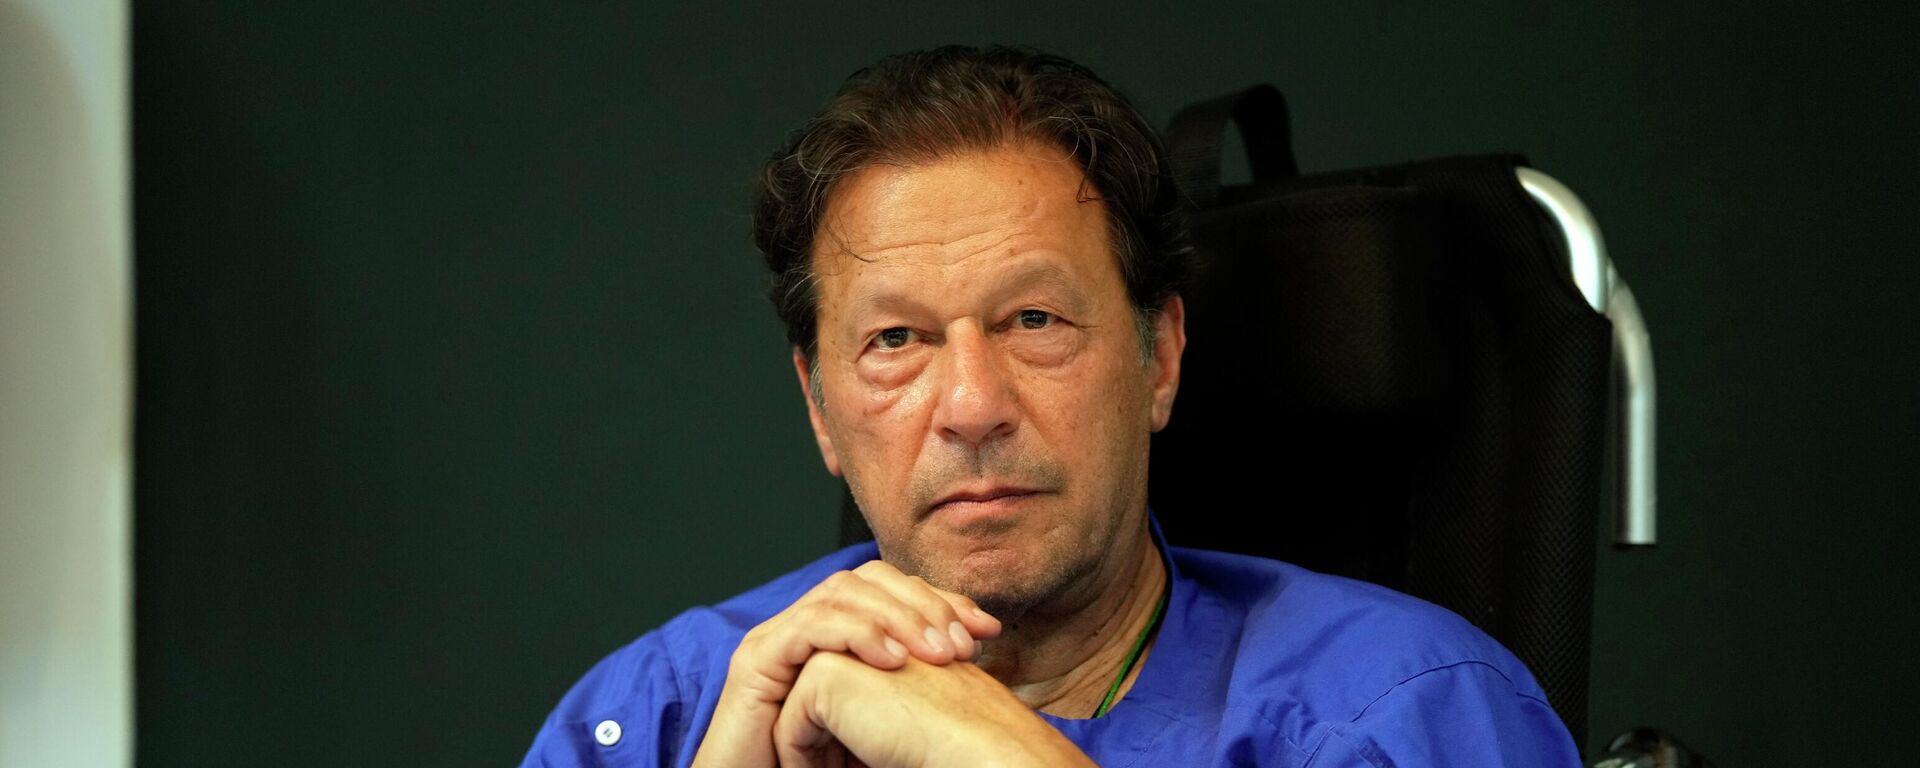 Former Pakistani Prime Minister Imran Khan speaks during a news conference in Shaukat Khanum hospital, where he was being treated for a gunshot wound in Lahore, Pakistan, on Nov. 4, 2022. - Sputnik India, 1920, 06.03.2023